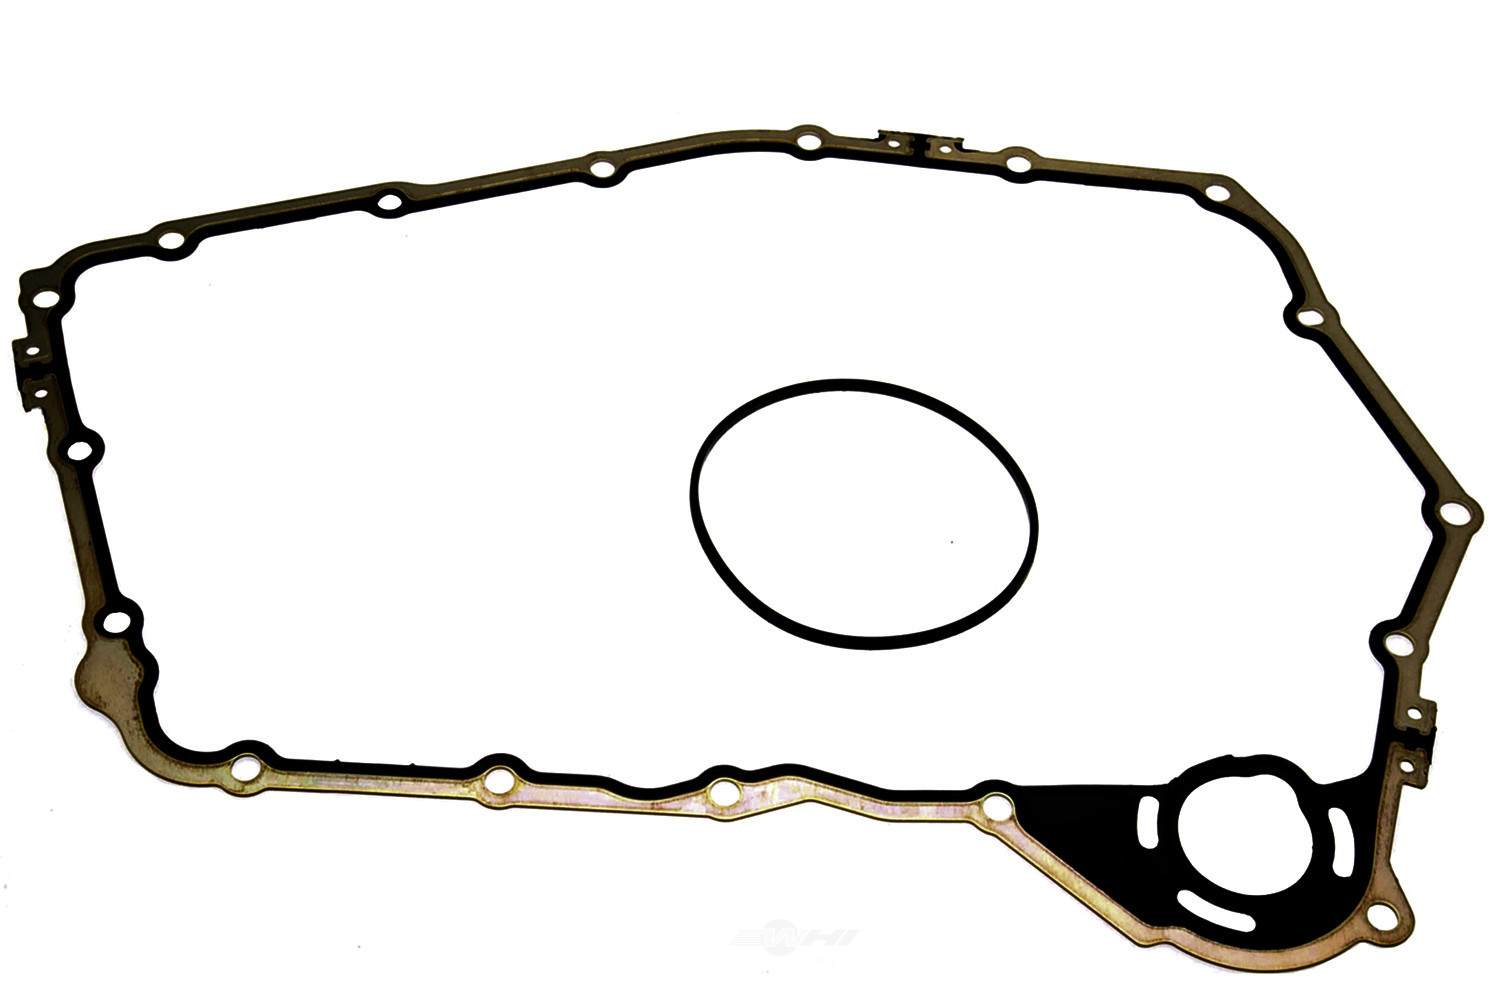 GM GENUINE PARTS - Automatic Transmission Side Cover Gasket - GMP 24206959